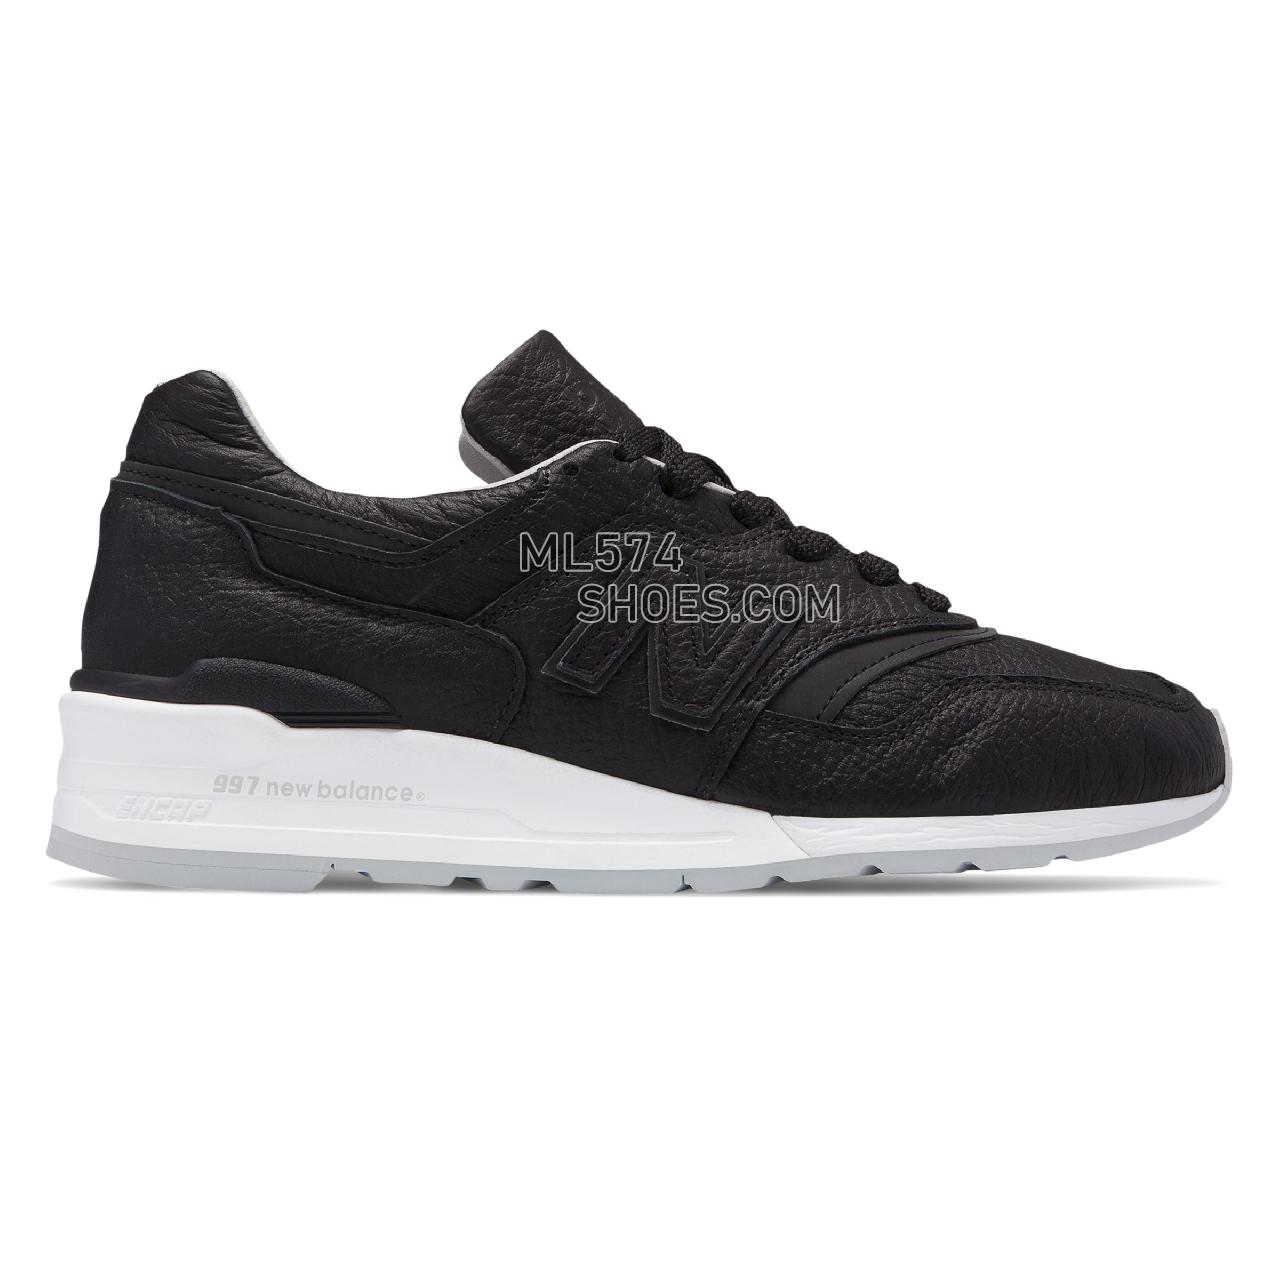 New Balance Made in US 997 Bison - Men's 997 Made in US Classic M997-LH - Black with Grey - M997BSO